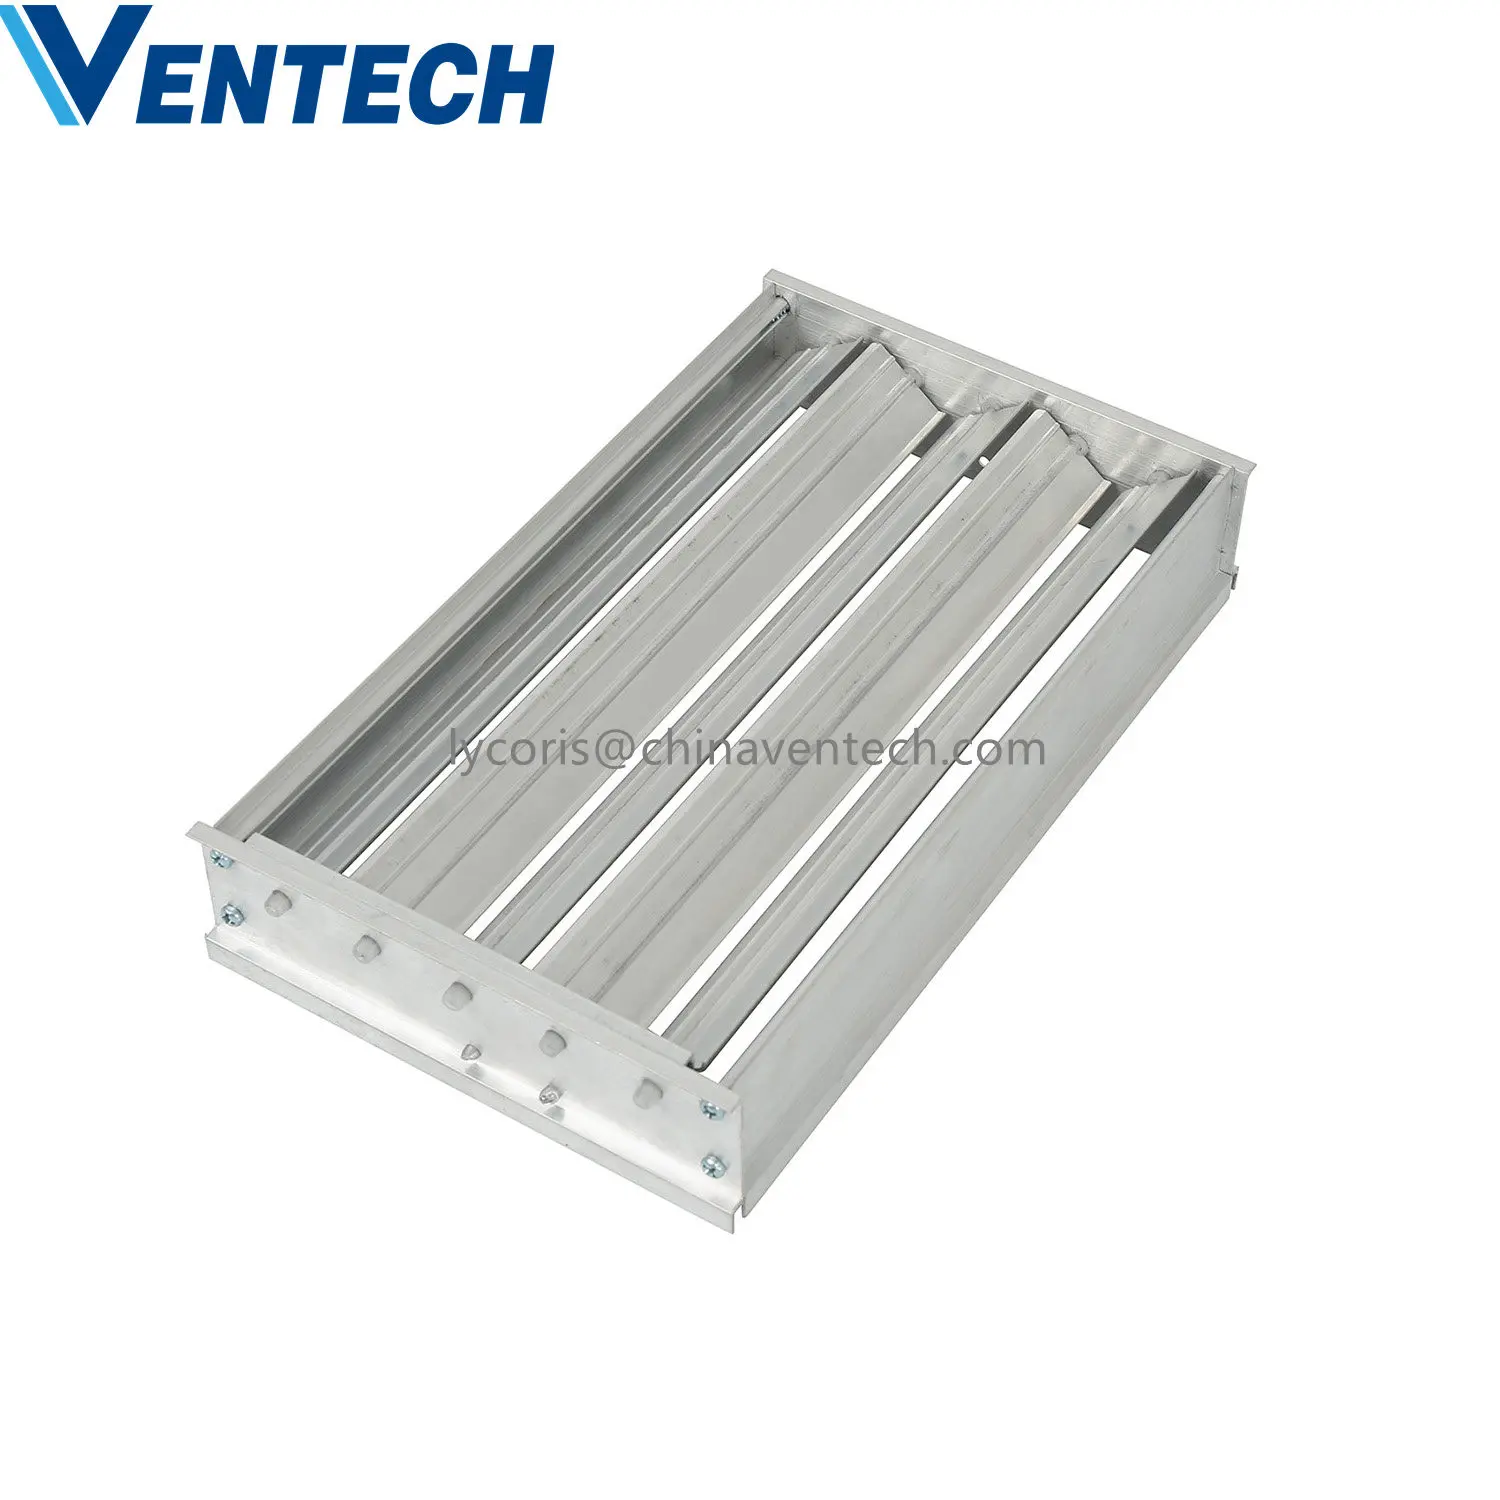 Supply Double Deflection Grille Air Grille Damper Aluminum Oppose Blade Damper Ceiling AIr Diffuser Square Air Diffuser Damper